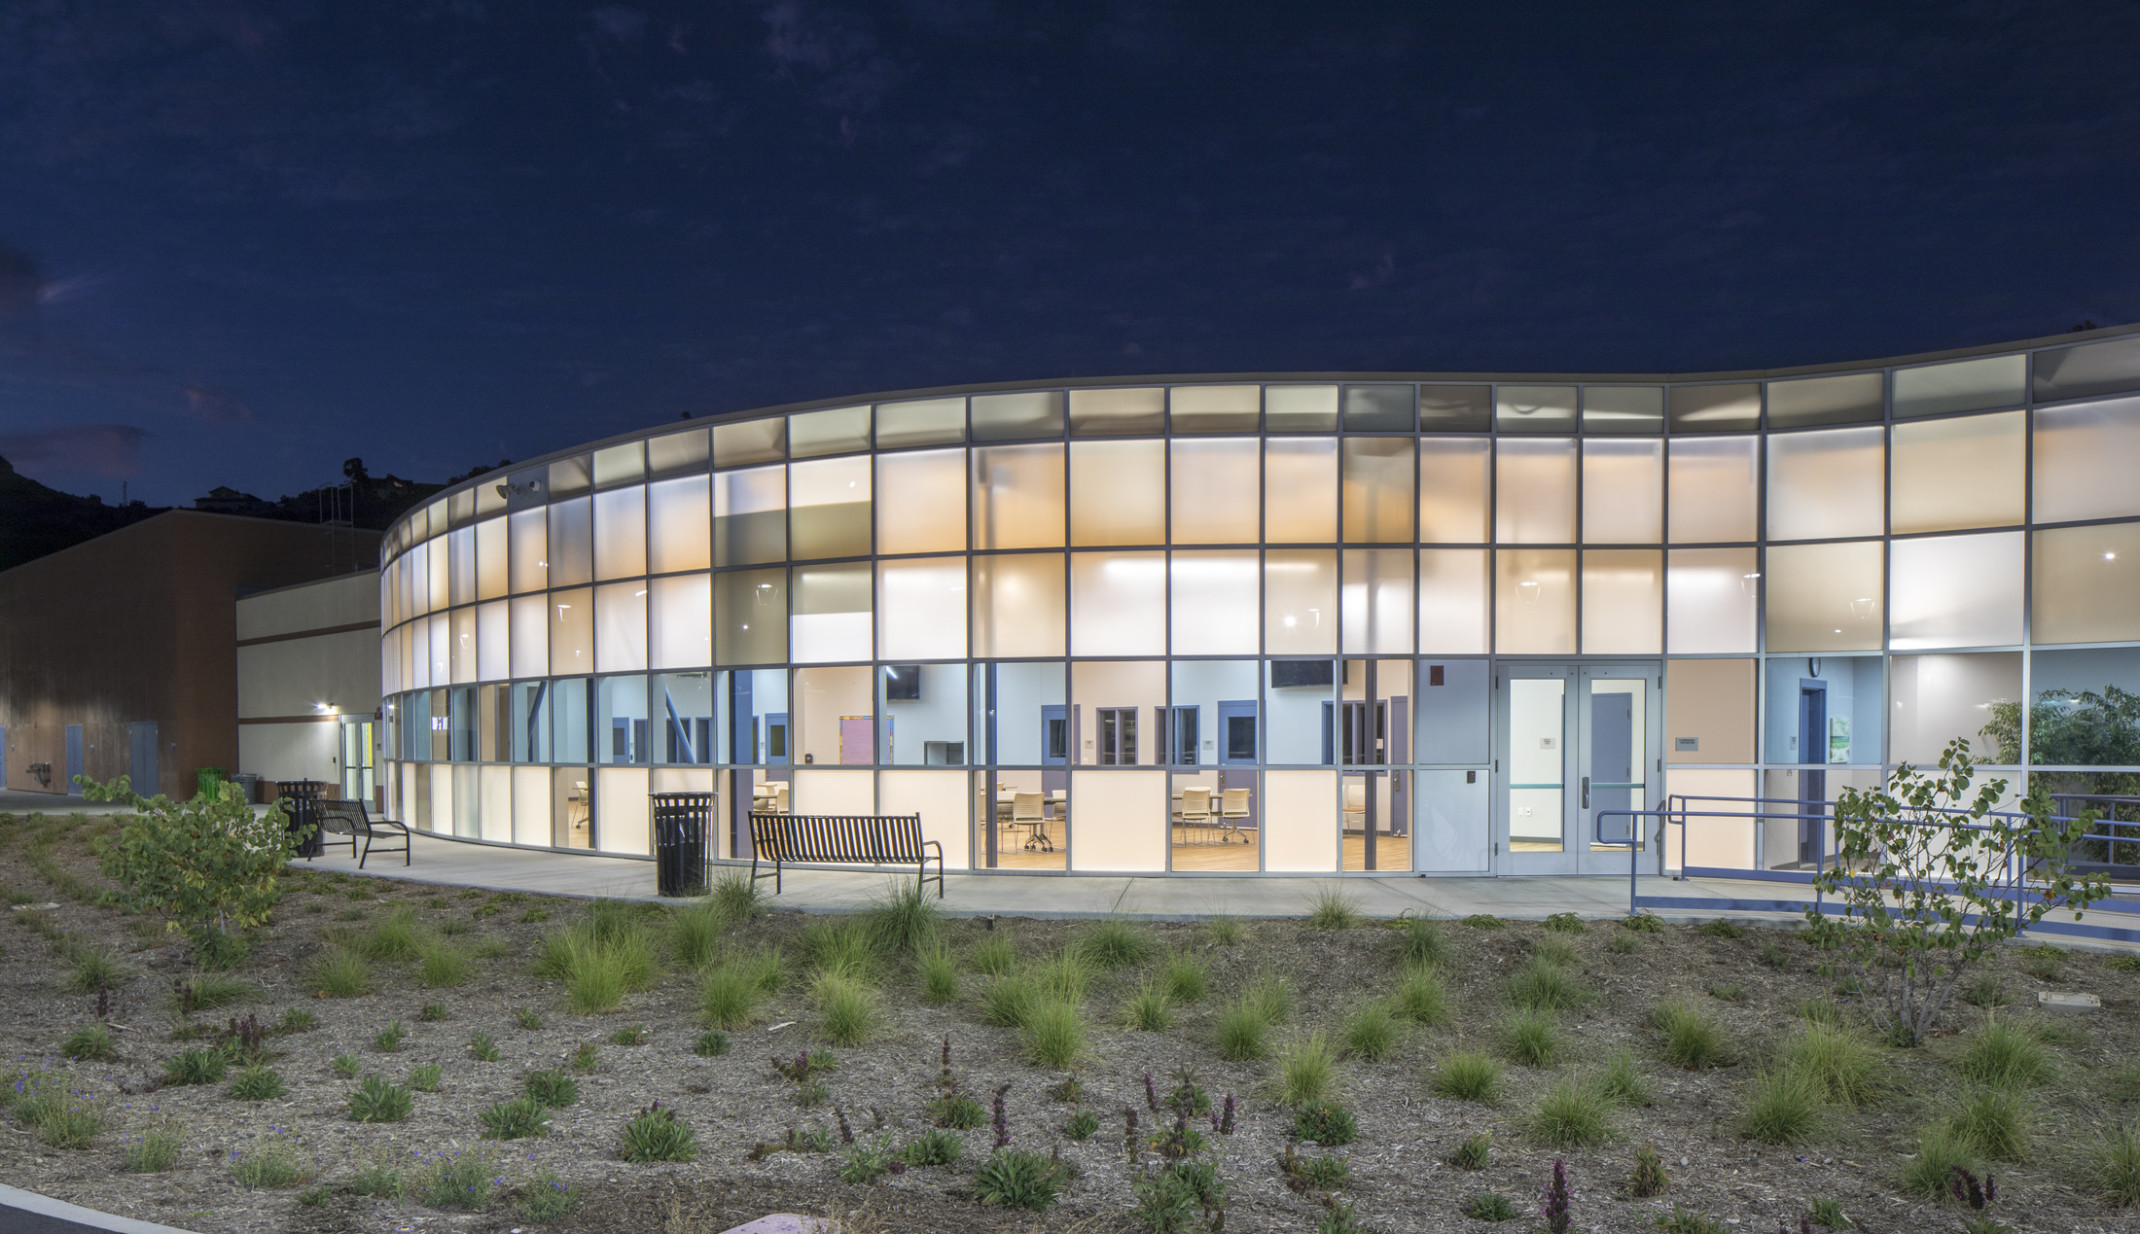 Campus Kilpatrick Youth Facility, an illuminated rounded double height paneled glass facade with blue translucent stripe